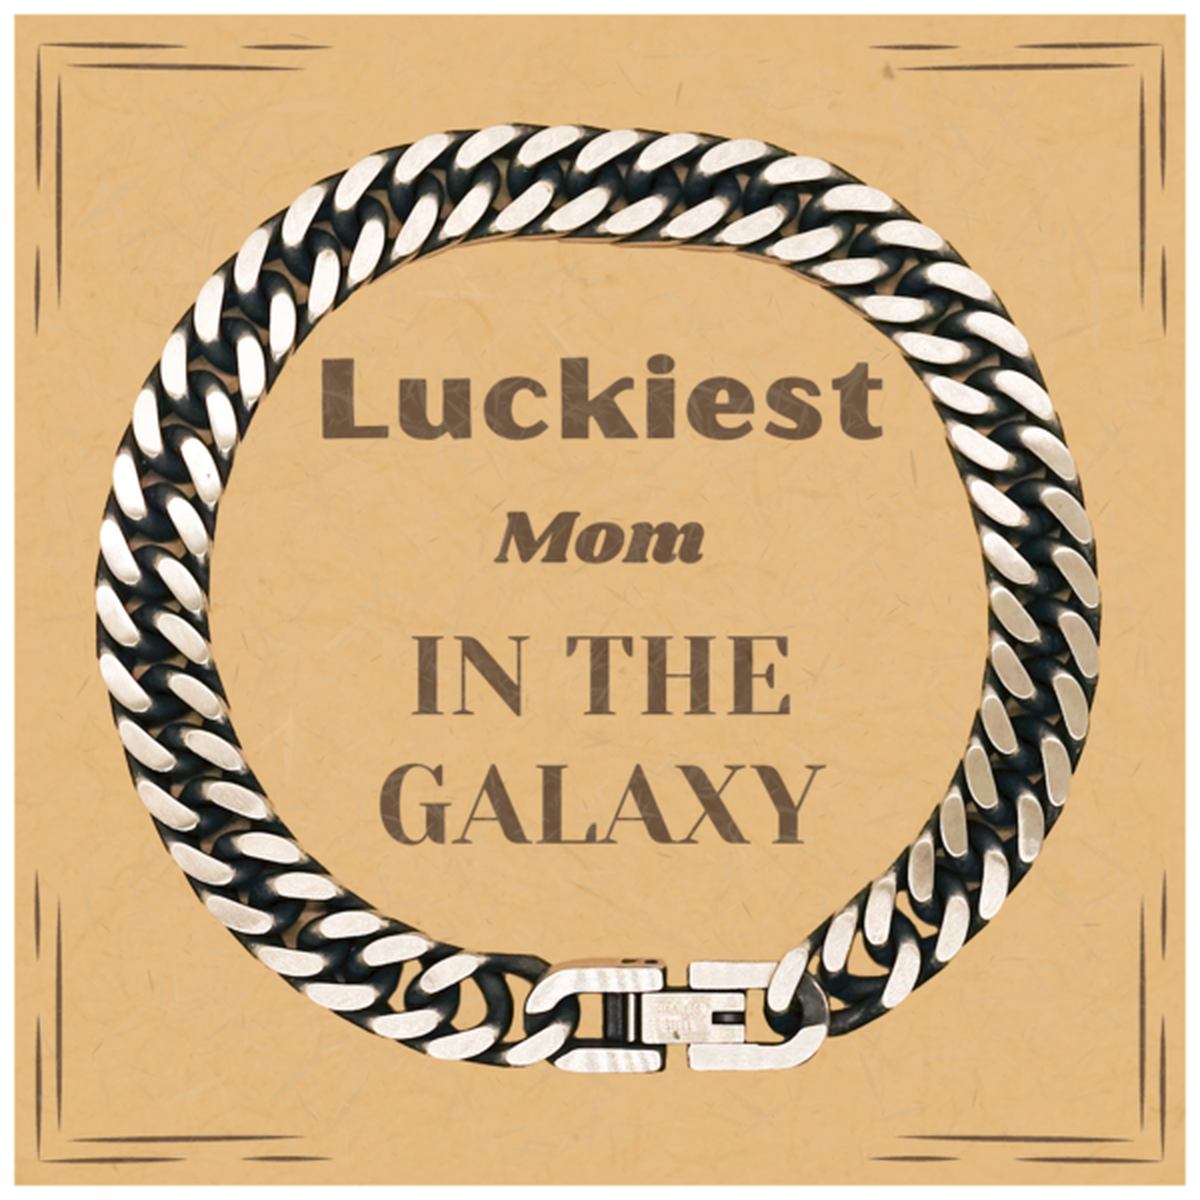 Luckiest Mom in the Galaxy, To My Mom Message Card Gifts, Christmas Mom Cuban Link Chain Bracelet Gifts, X-mas Birthday Unique Gifts For Mom Men Women